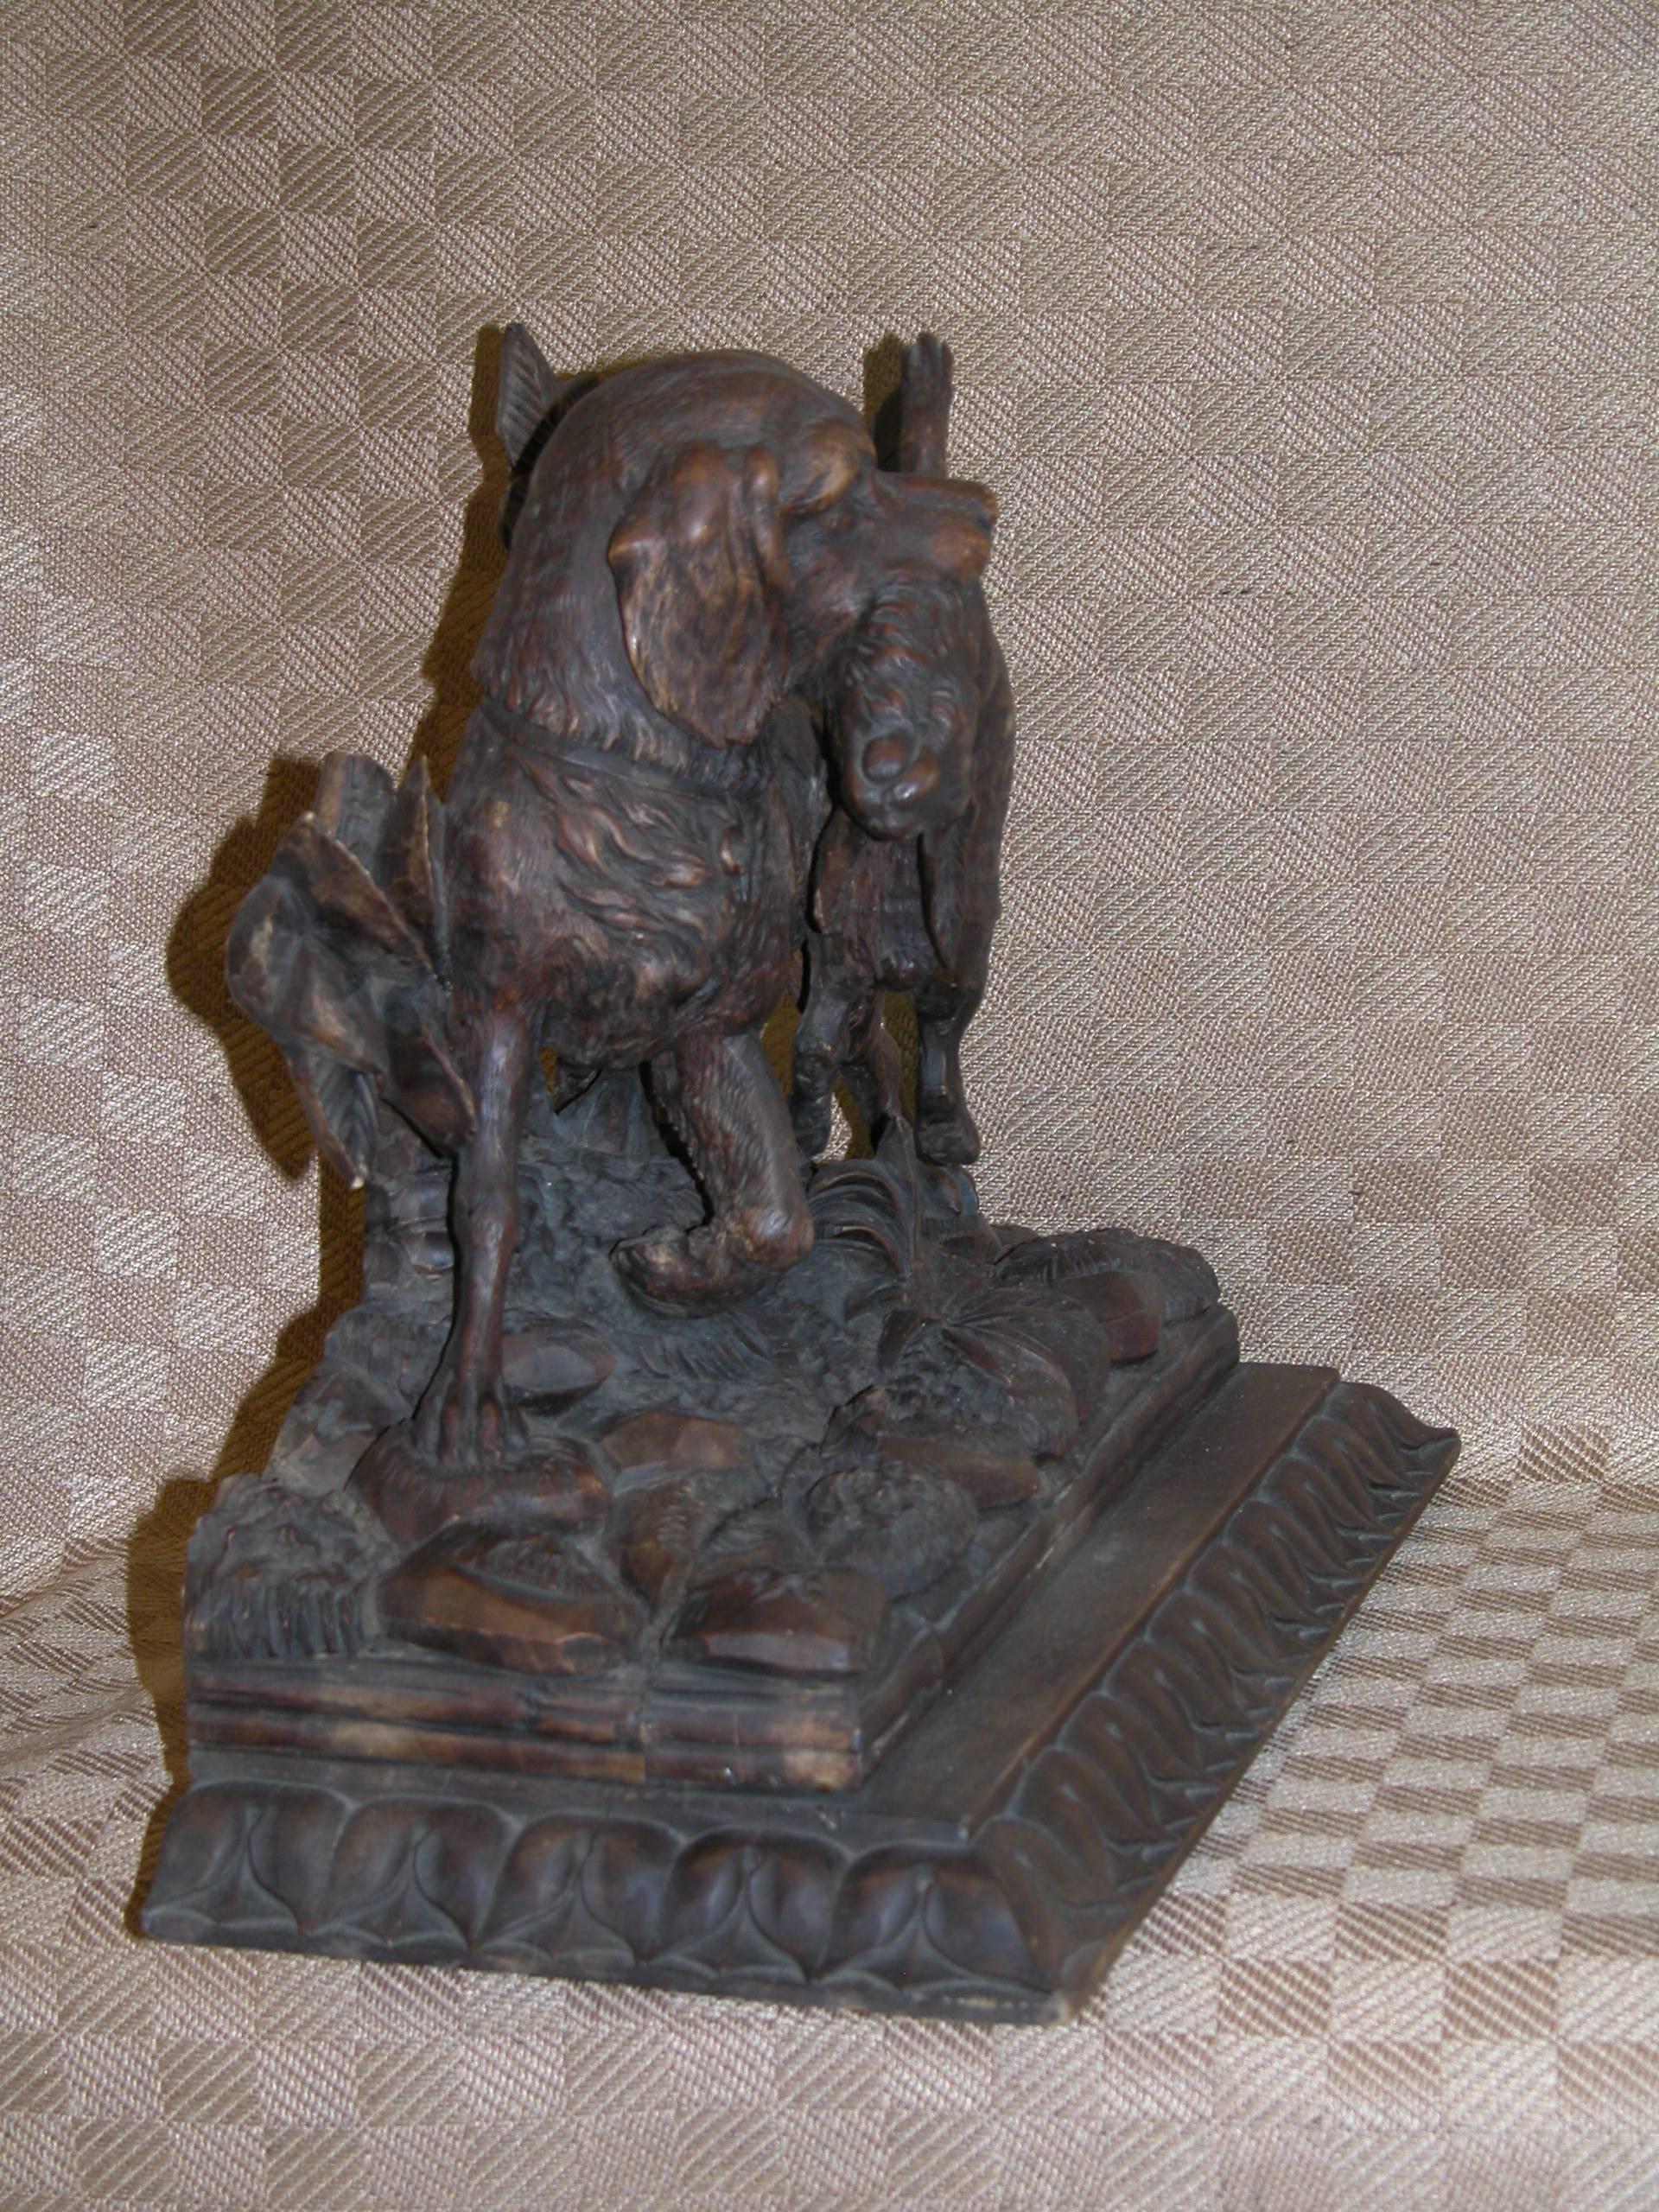 19th Century Black Forest Carving of Hunting Dog with Rabbit on Fancy Carved Base, circa 1850